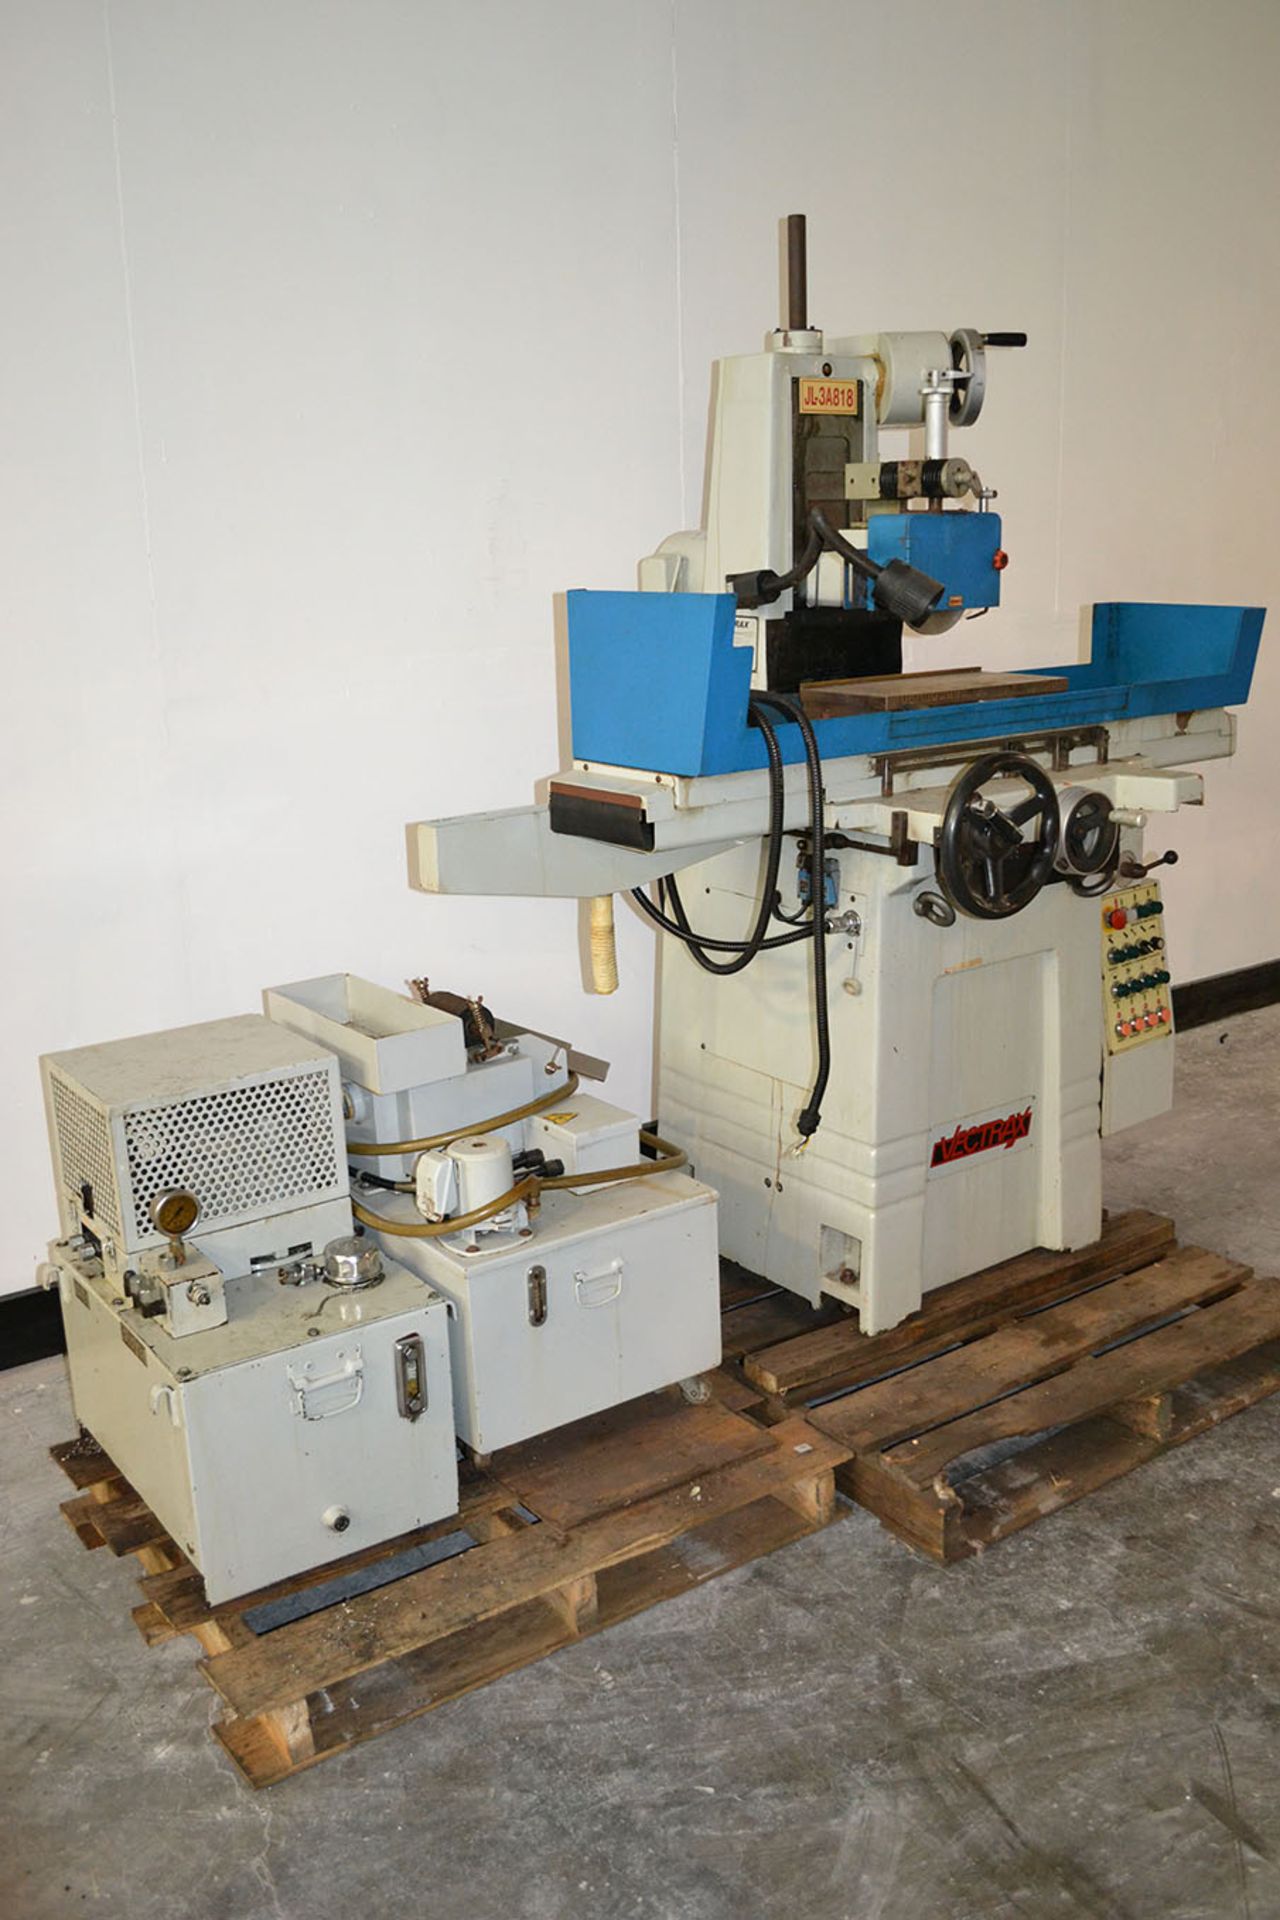 Vectrax JL-3A818 8″ x 18″ Hydraulic Automatic Surface Grinder - Image 3 of 11